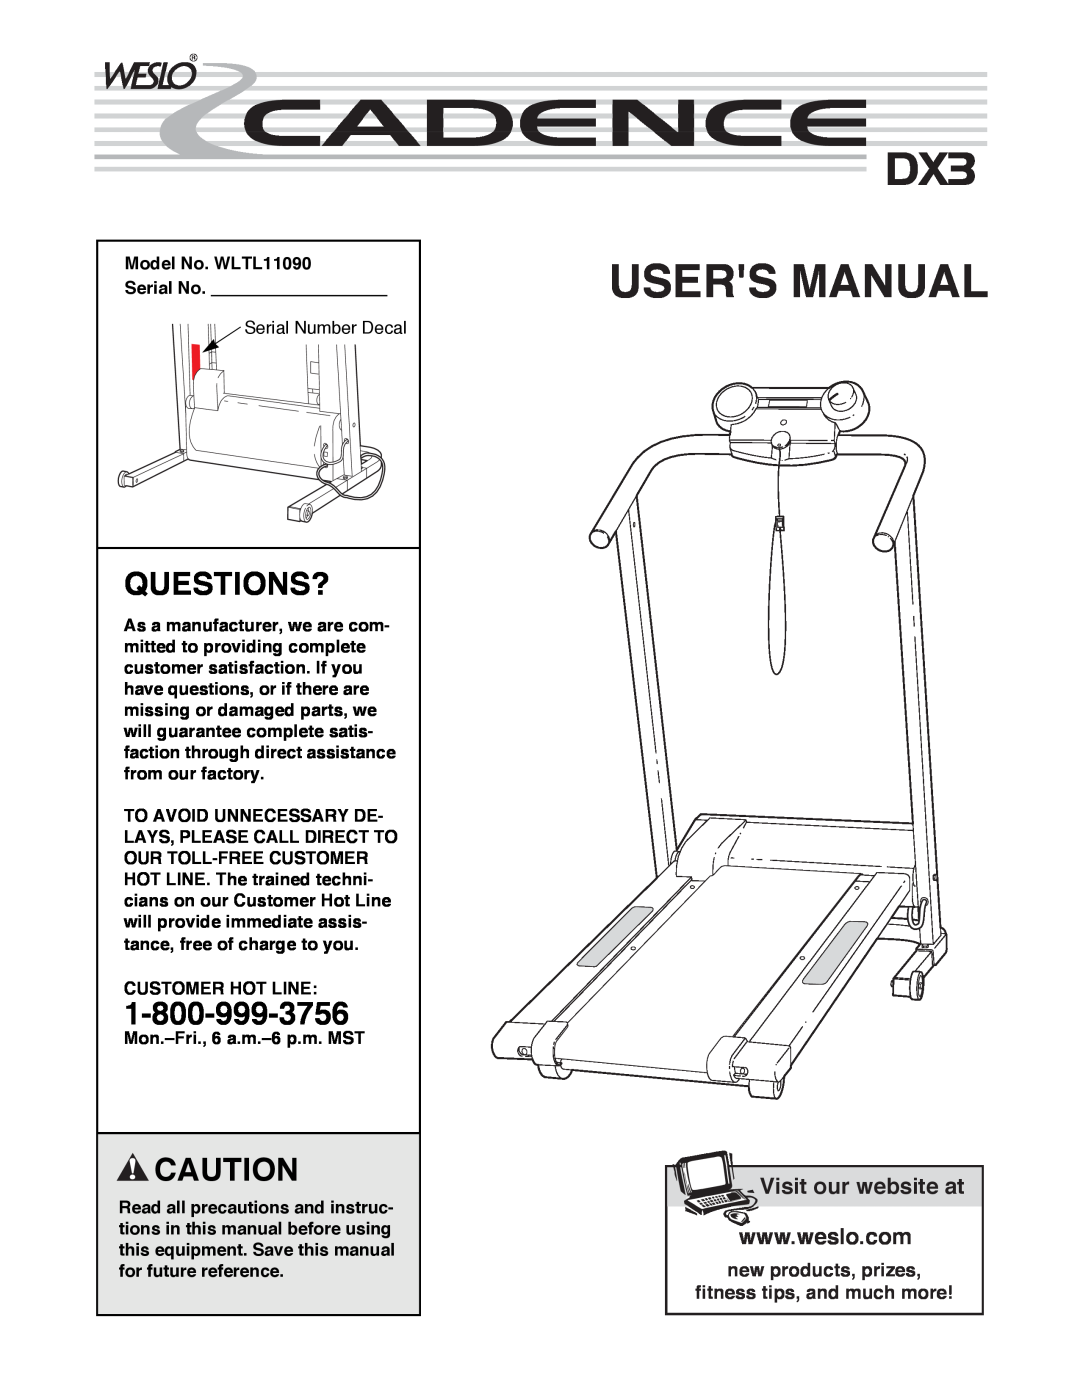 Weslo DX3 user manual Questions?, Users Manual, Visit our website at, new products, prizes fitness tips, and much more 